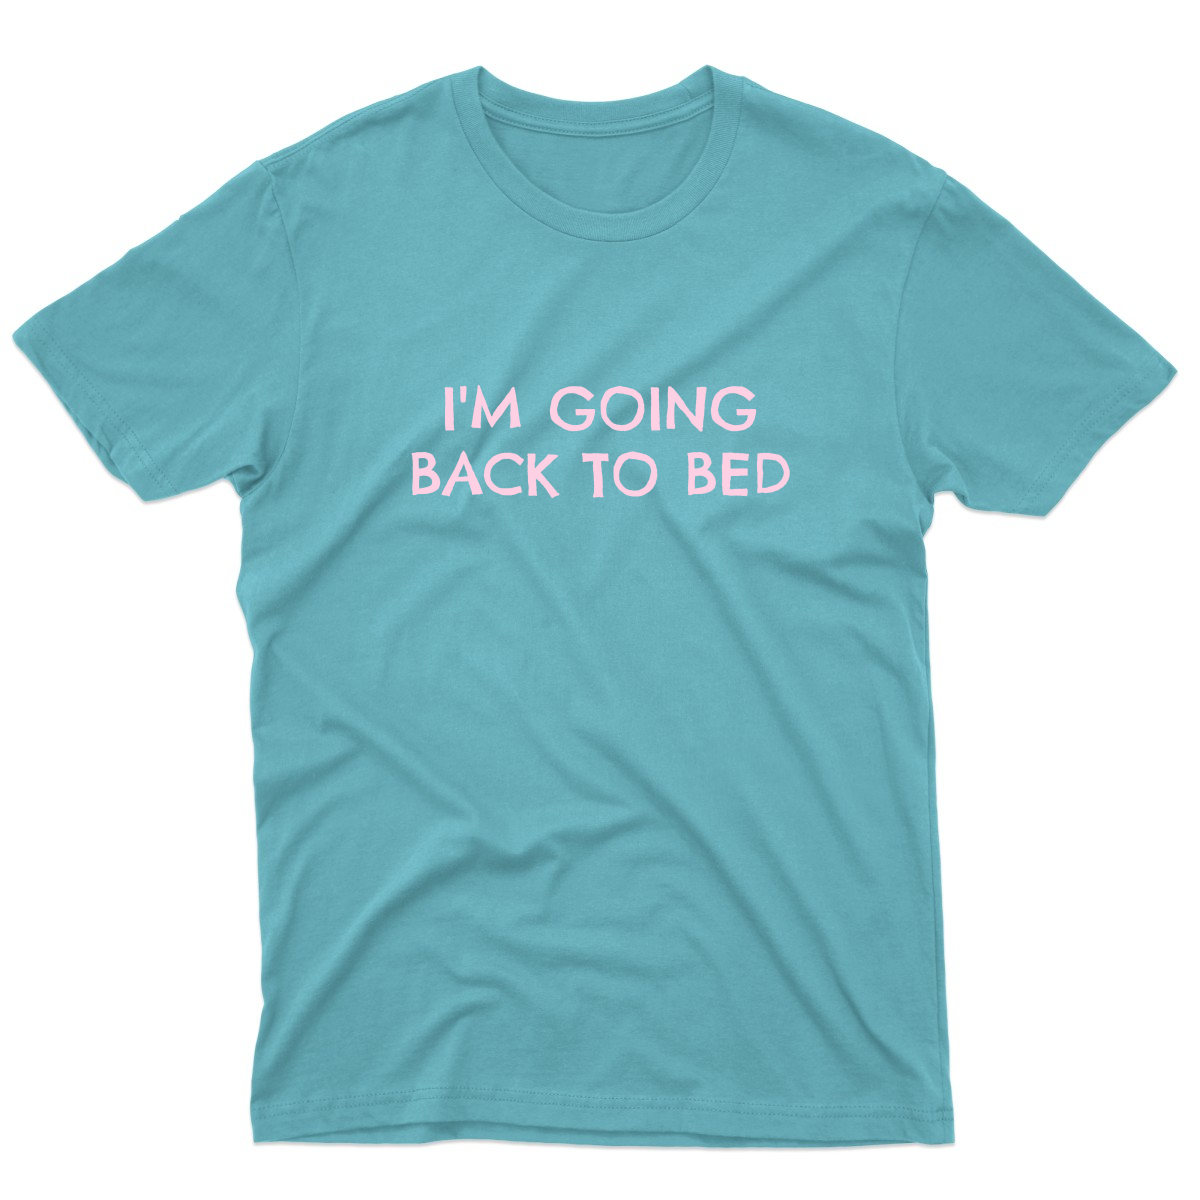 I'm Going Back to Bed Men's T-shirt | Turquoise